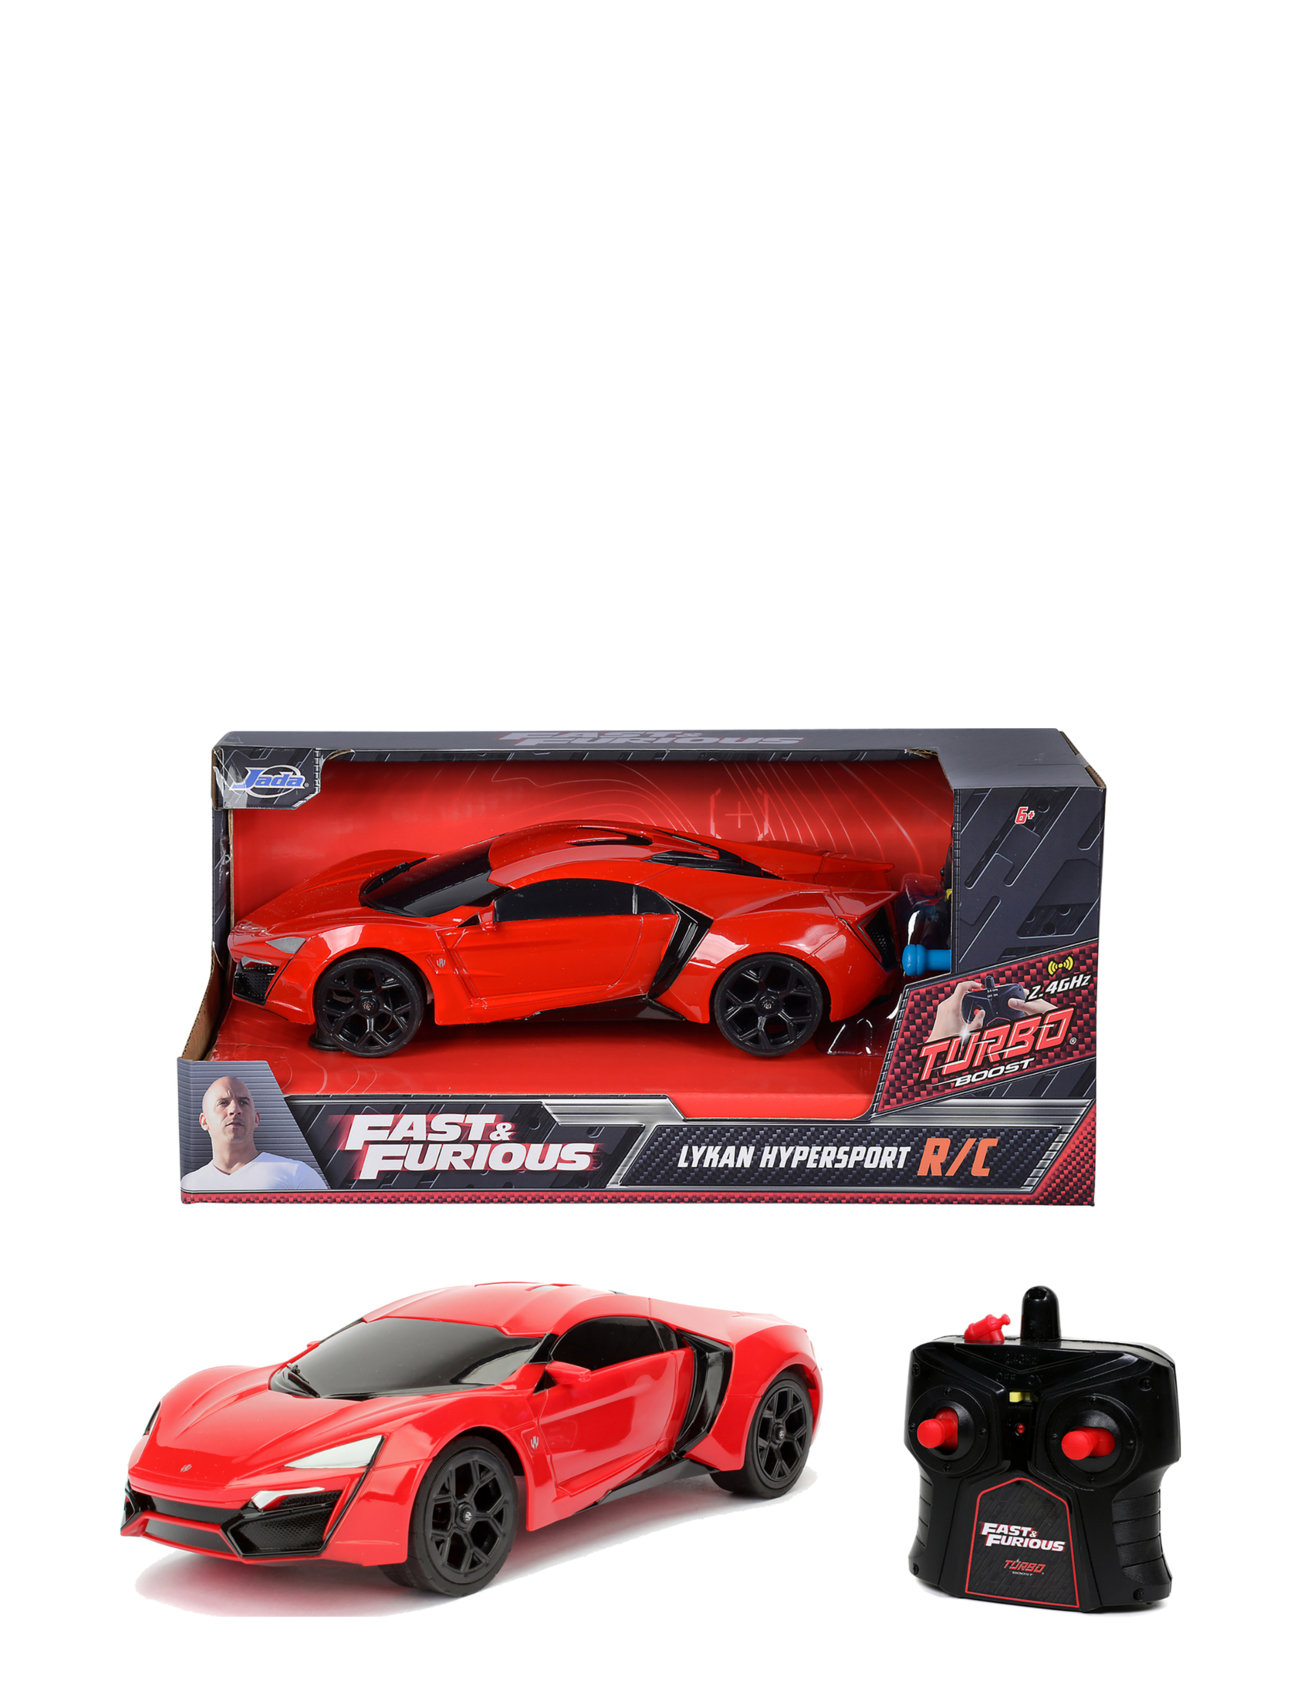 Jada - Fast & Furious Rc Lykan Hypersport 1:24 Toys Toy Cars & Vehicles Toy Cars Red Jada Toys